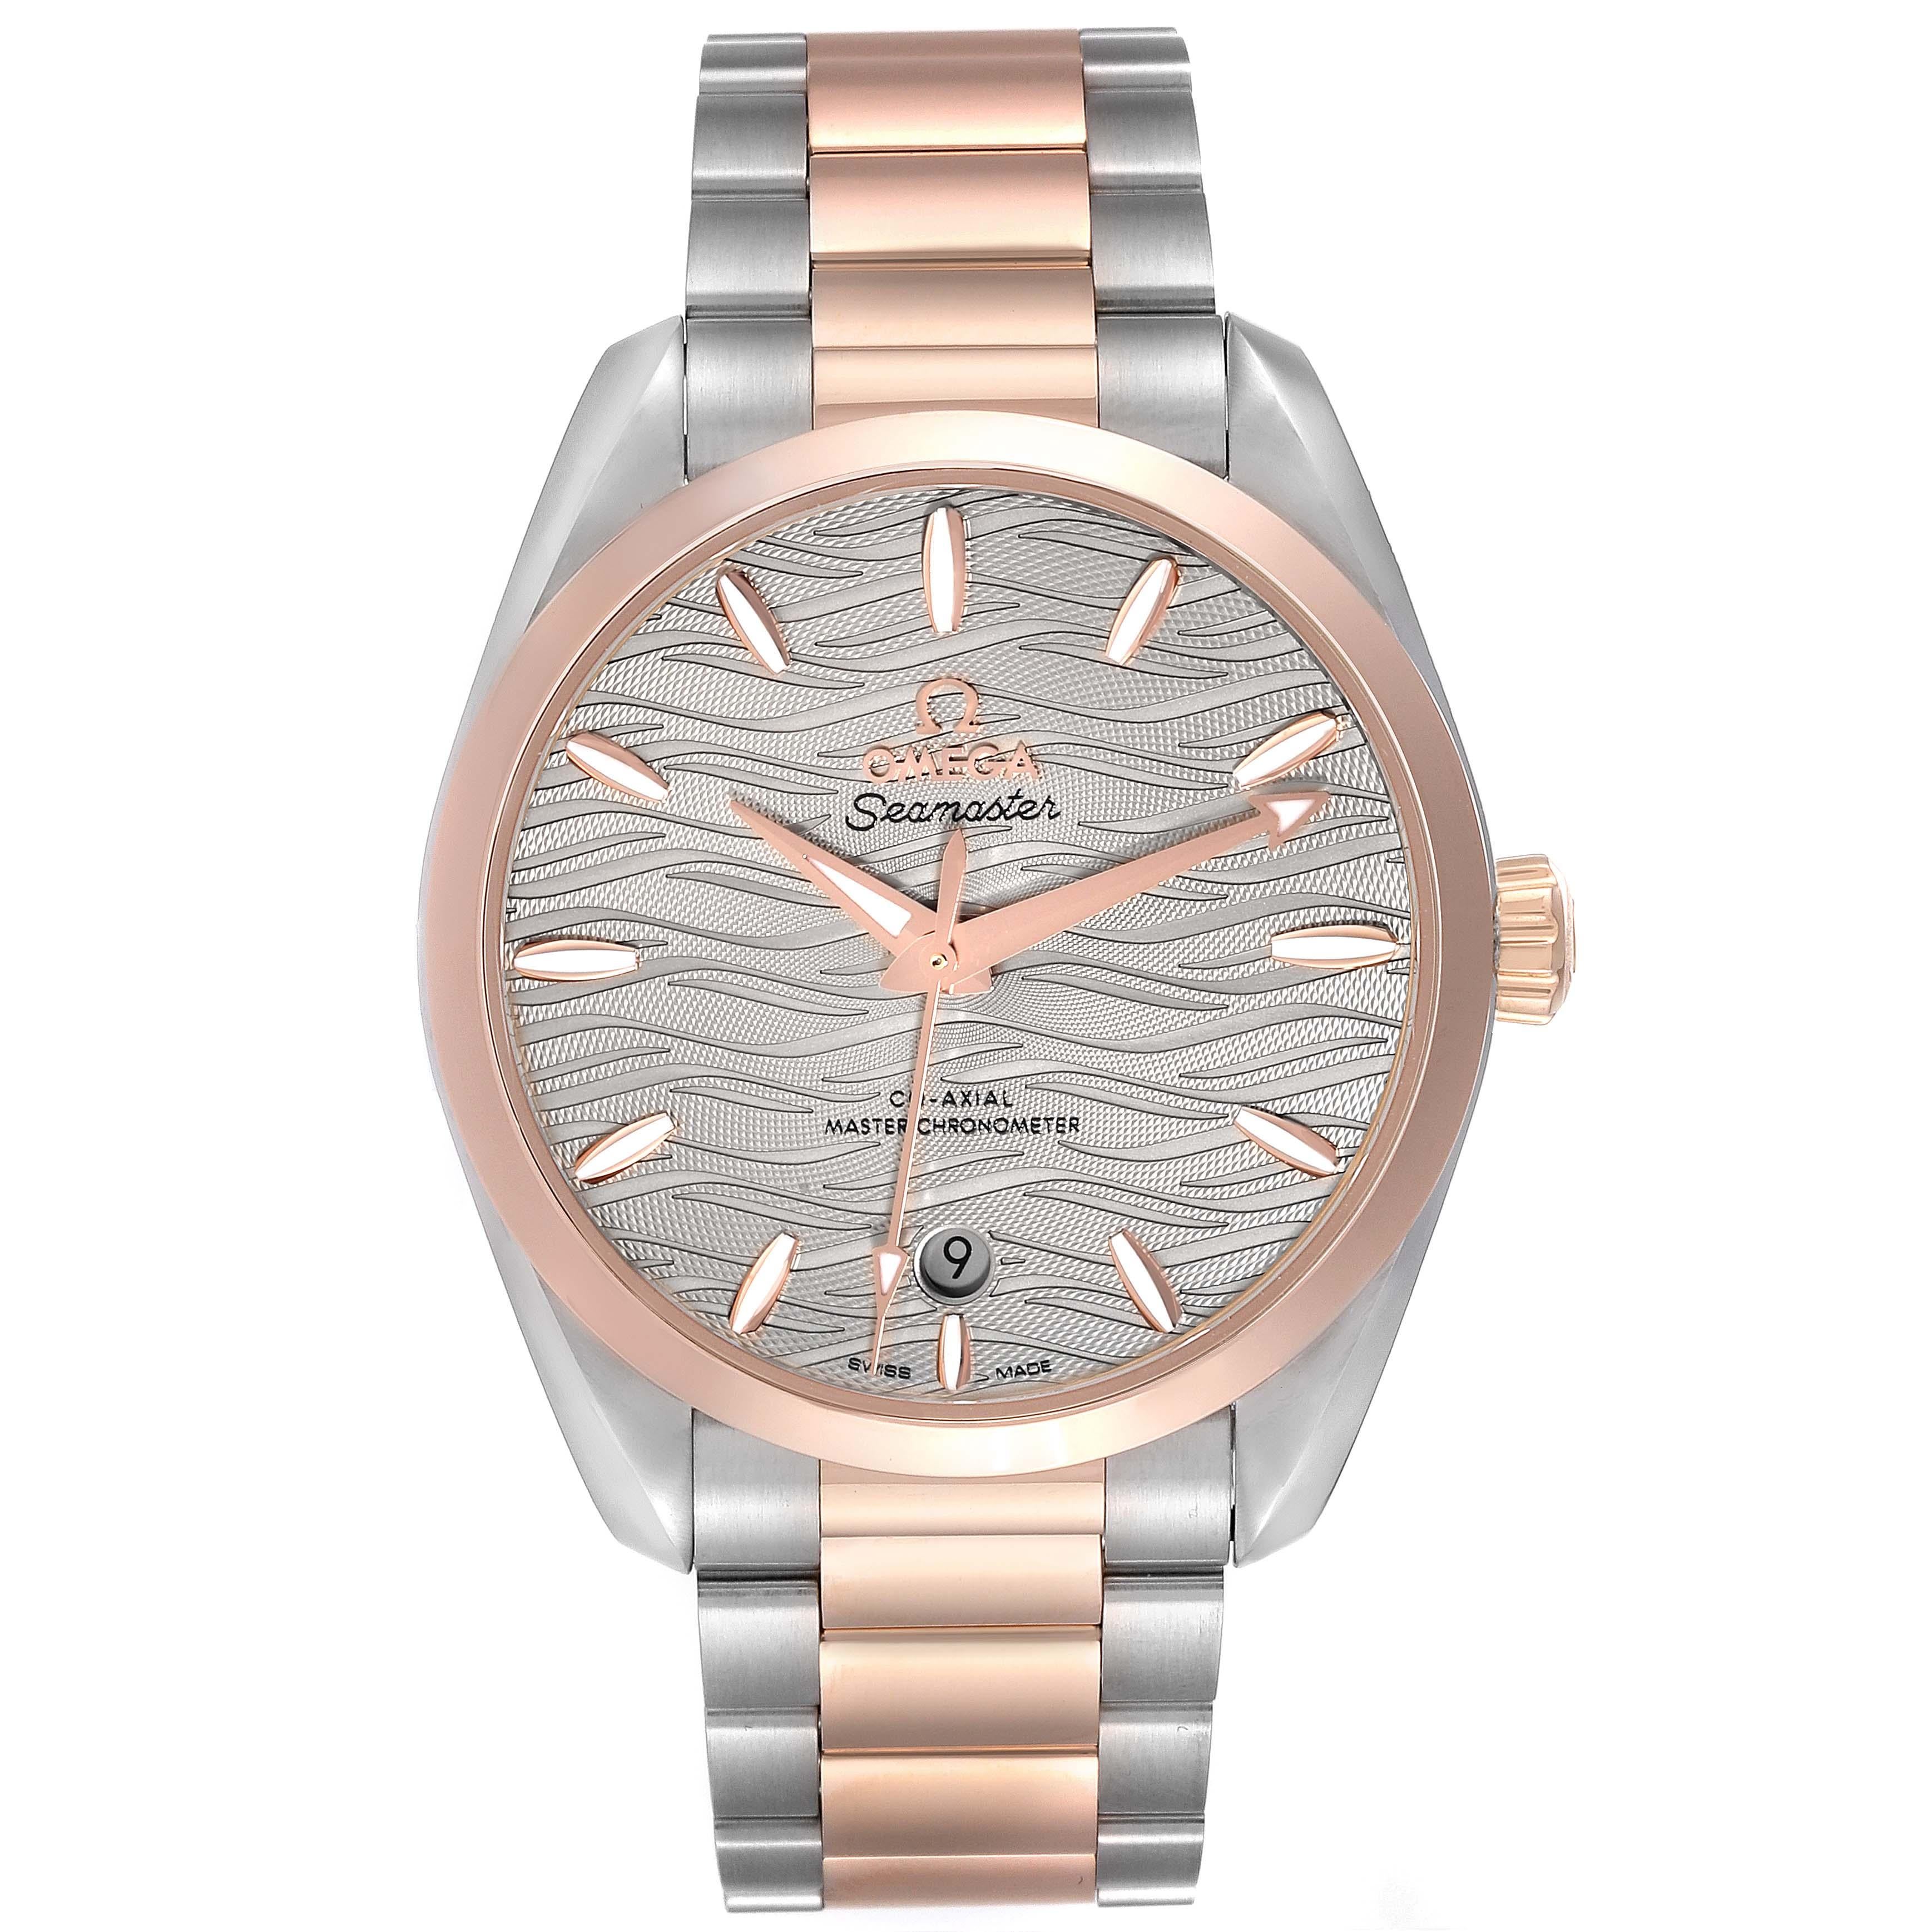 Omega Seamaster Aqua Terra Steel Rose Gold Mens Watch 220.20.38.20.06.001 Box Card. Automatic self-winding movement with Co-Axial Escapement. Caliber 8800. Stainless steel and 18k rose gold round case 38.0 mm in diameter. Exhibition transparent